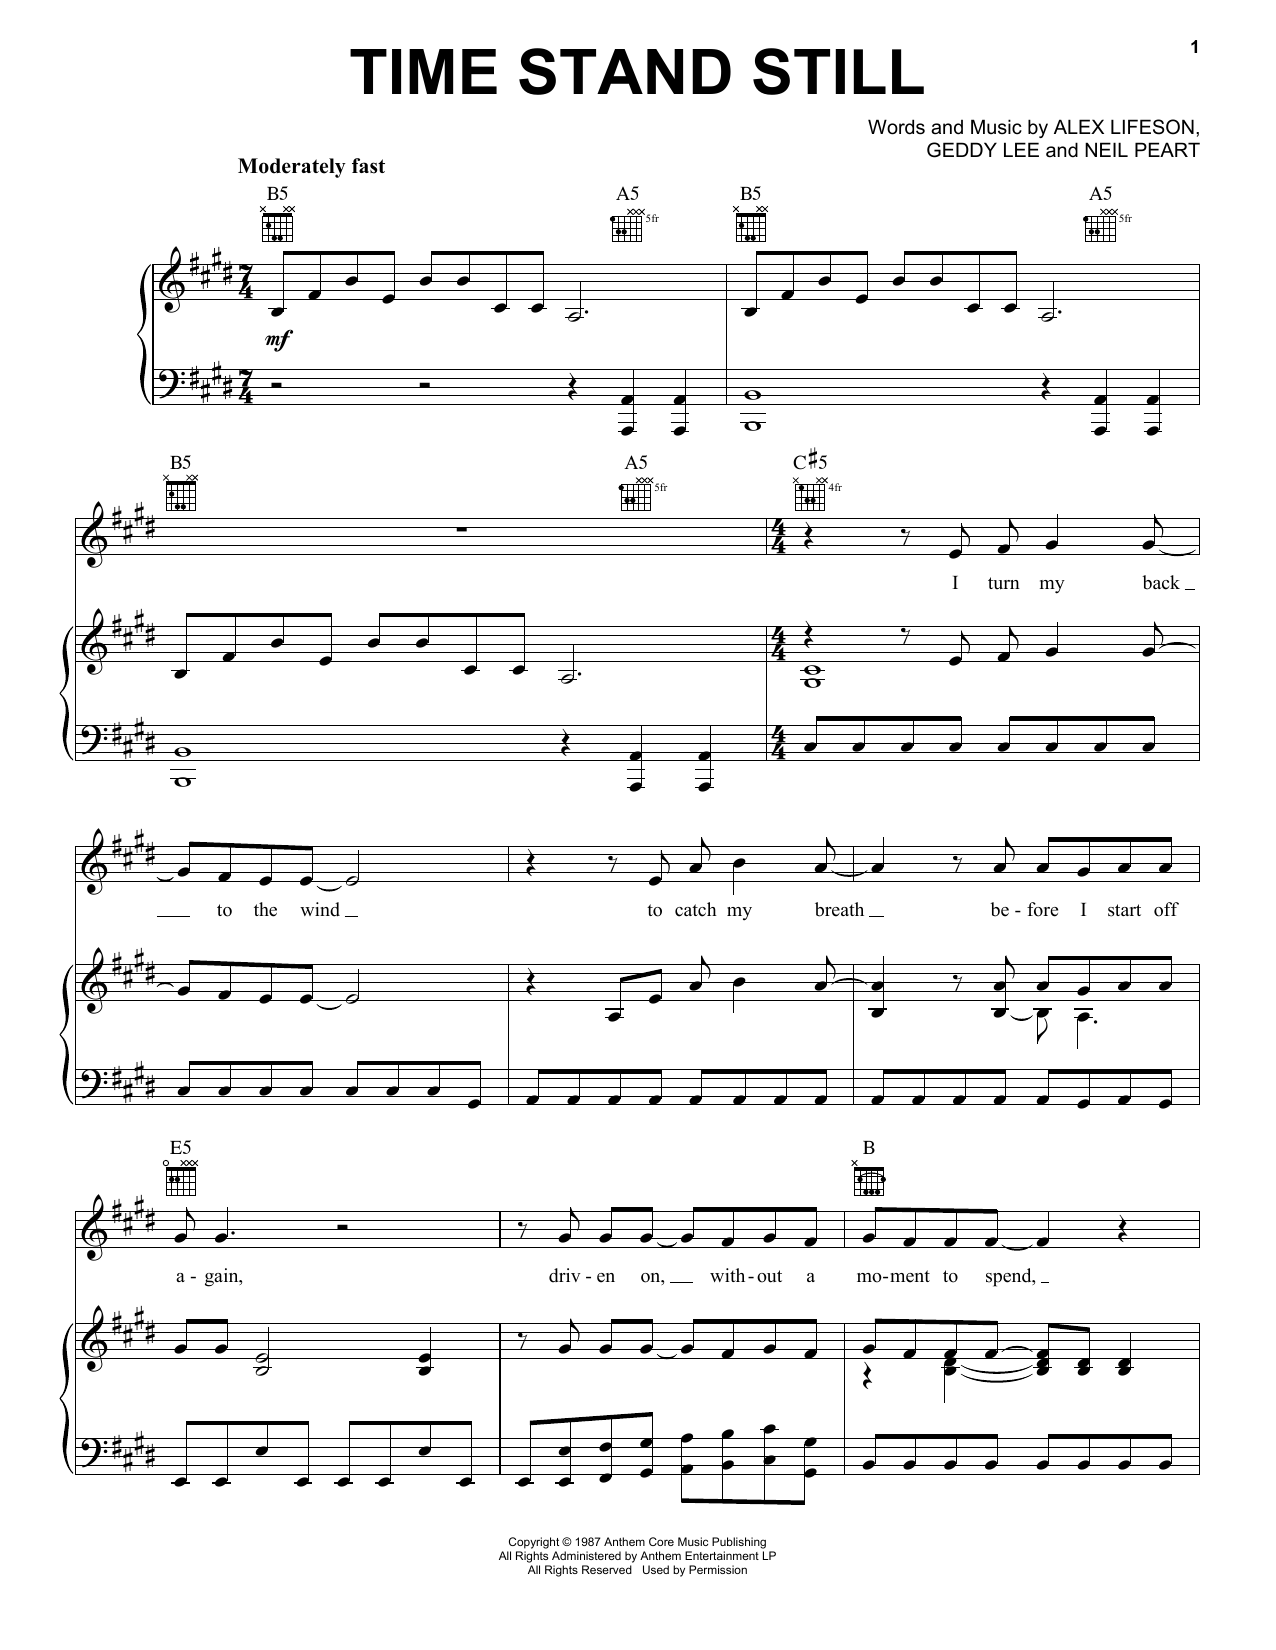 Download Rush Time Stand Still Sheet Music